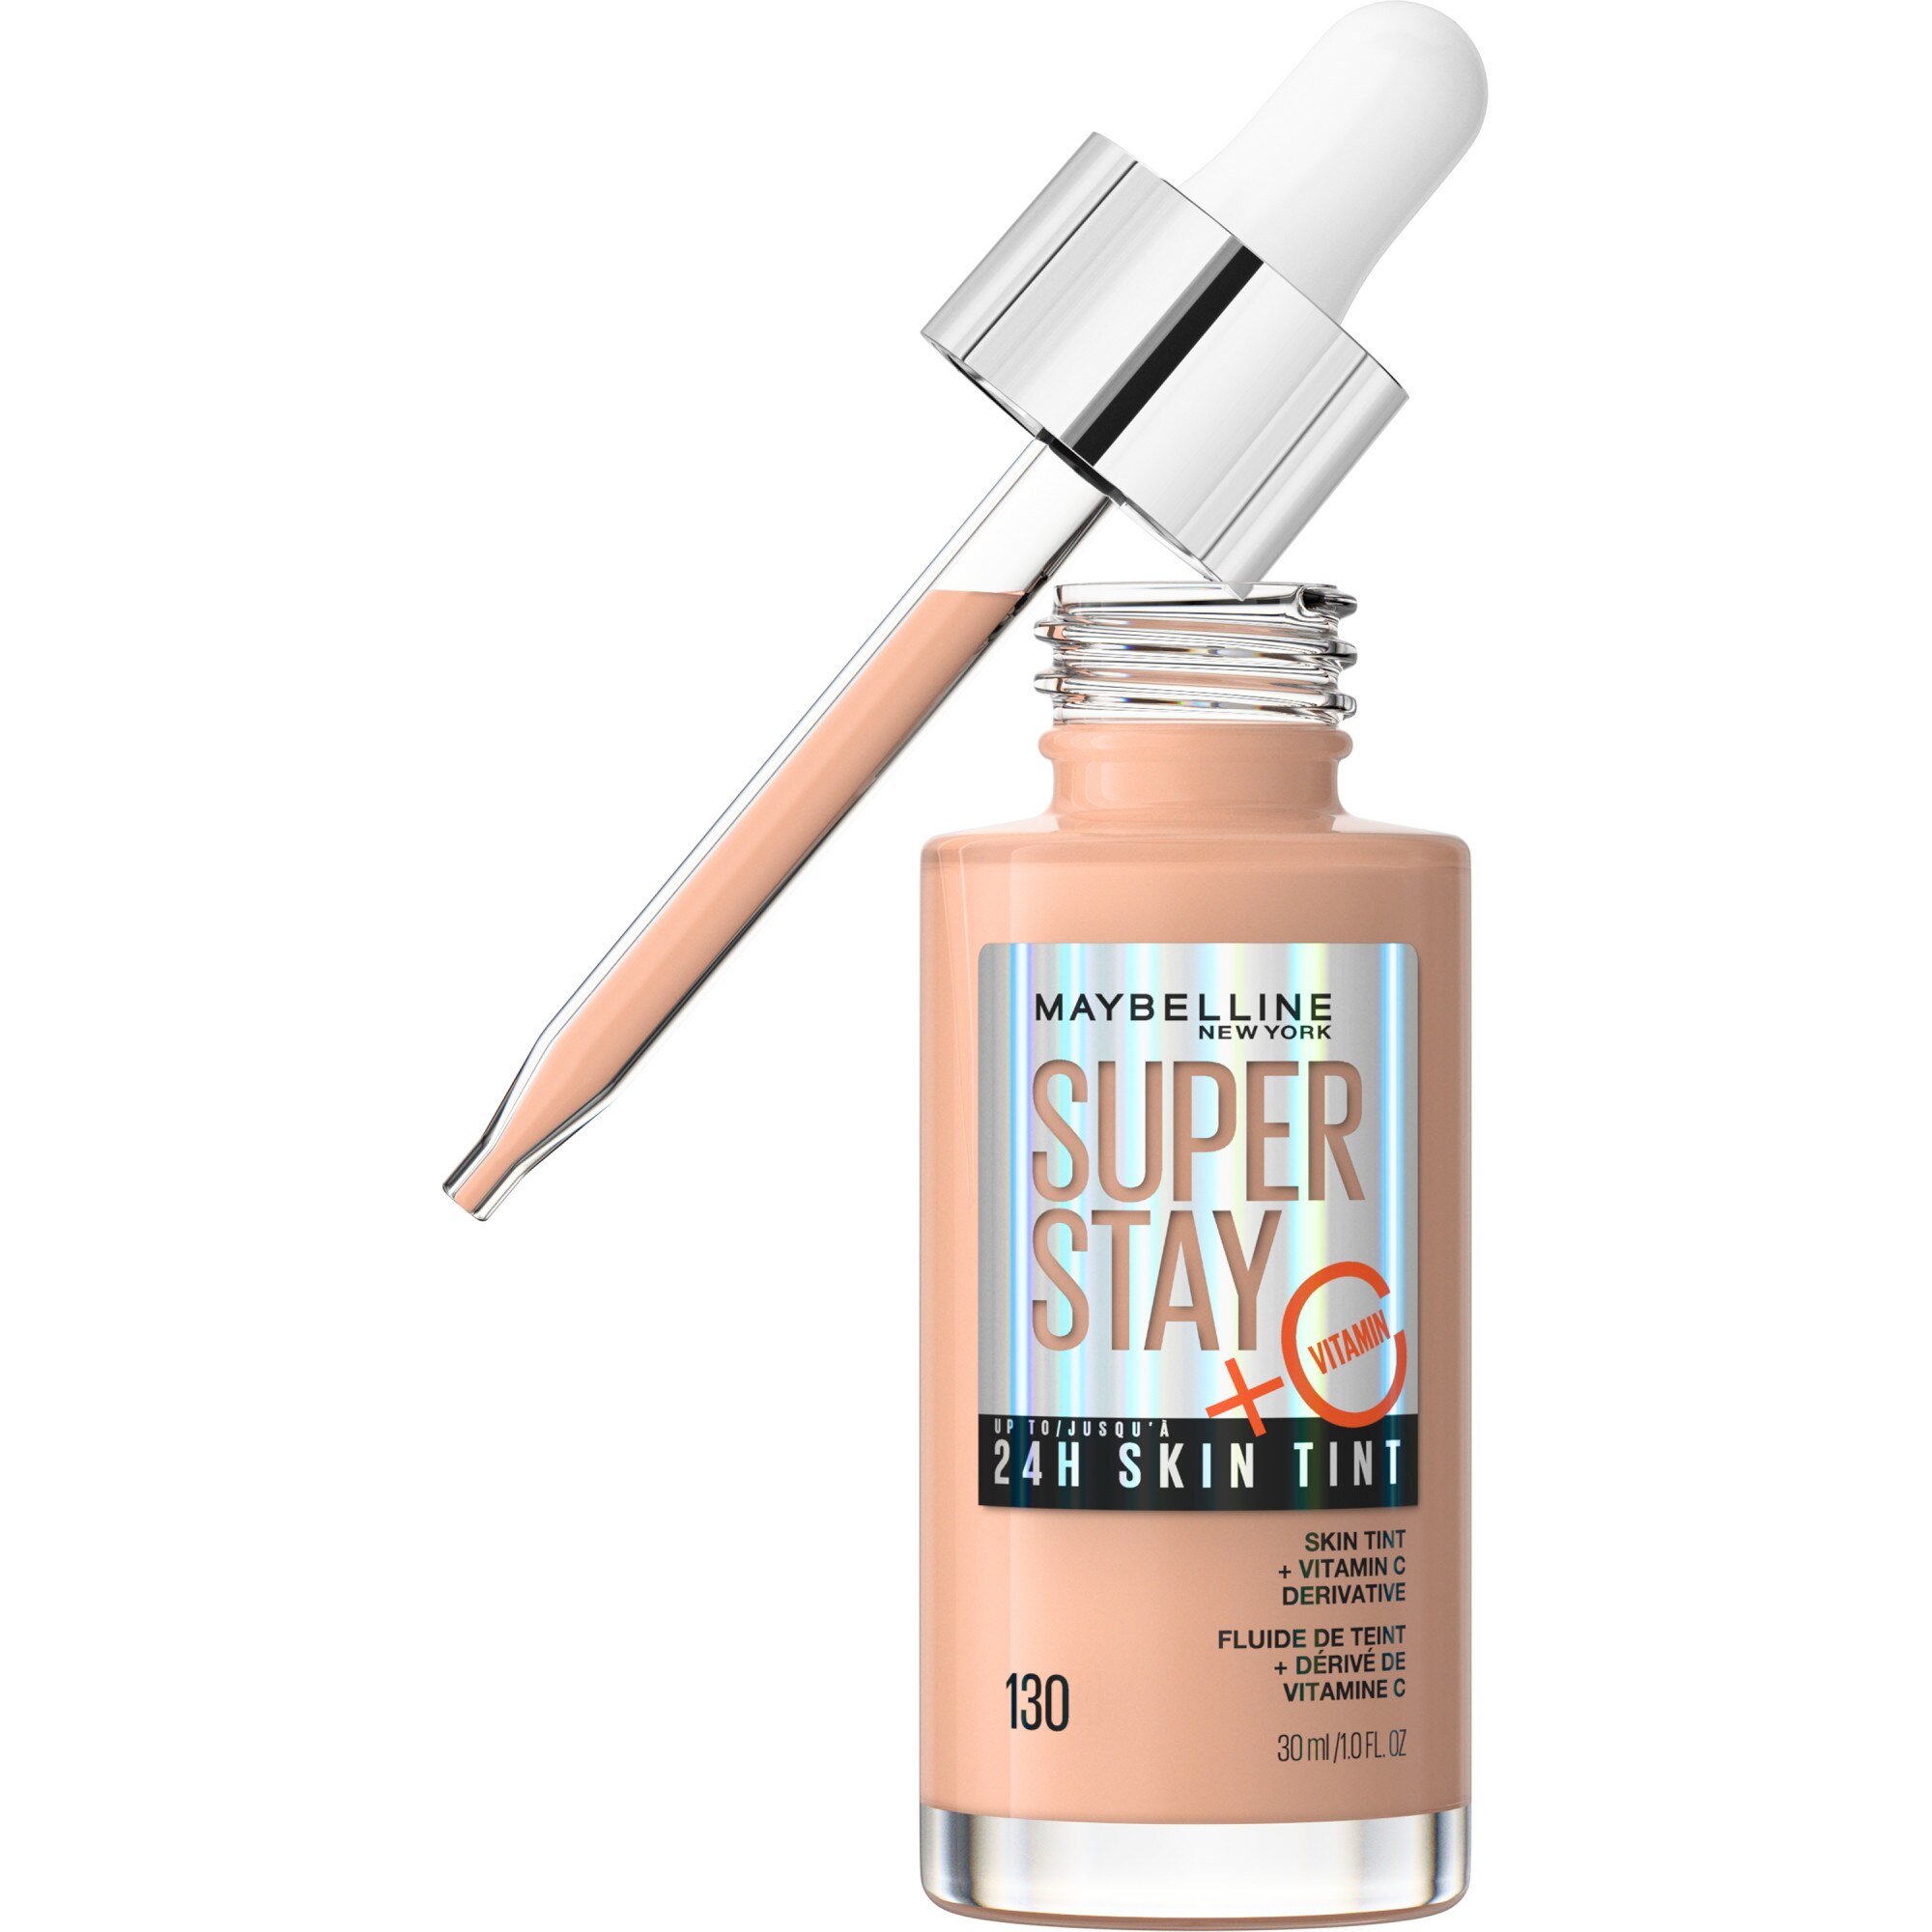 Maybelline New York Super Stay Up To 24HR Skin Tint With Vitamin C, 130, 1 Oz , CVS